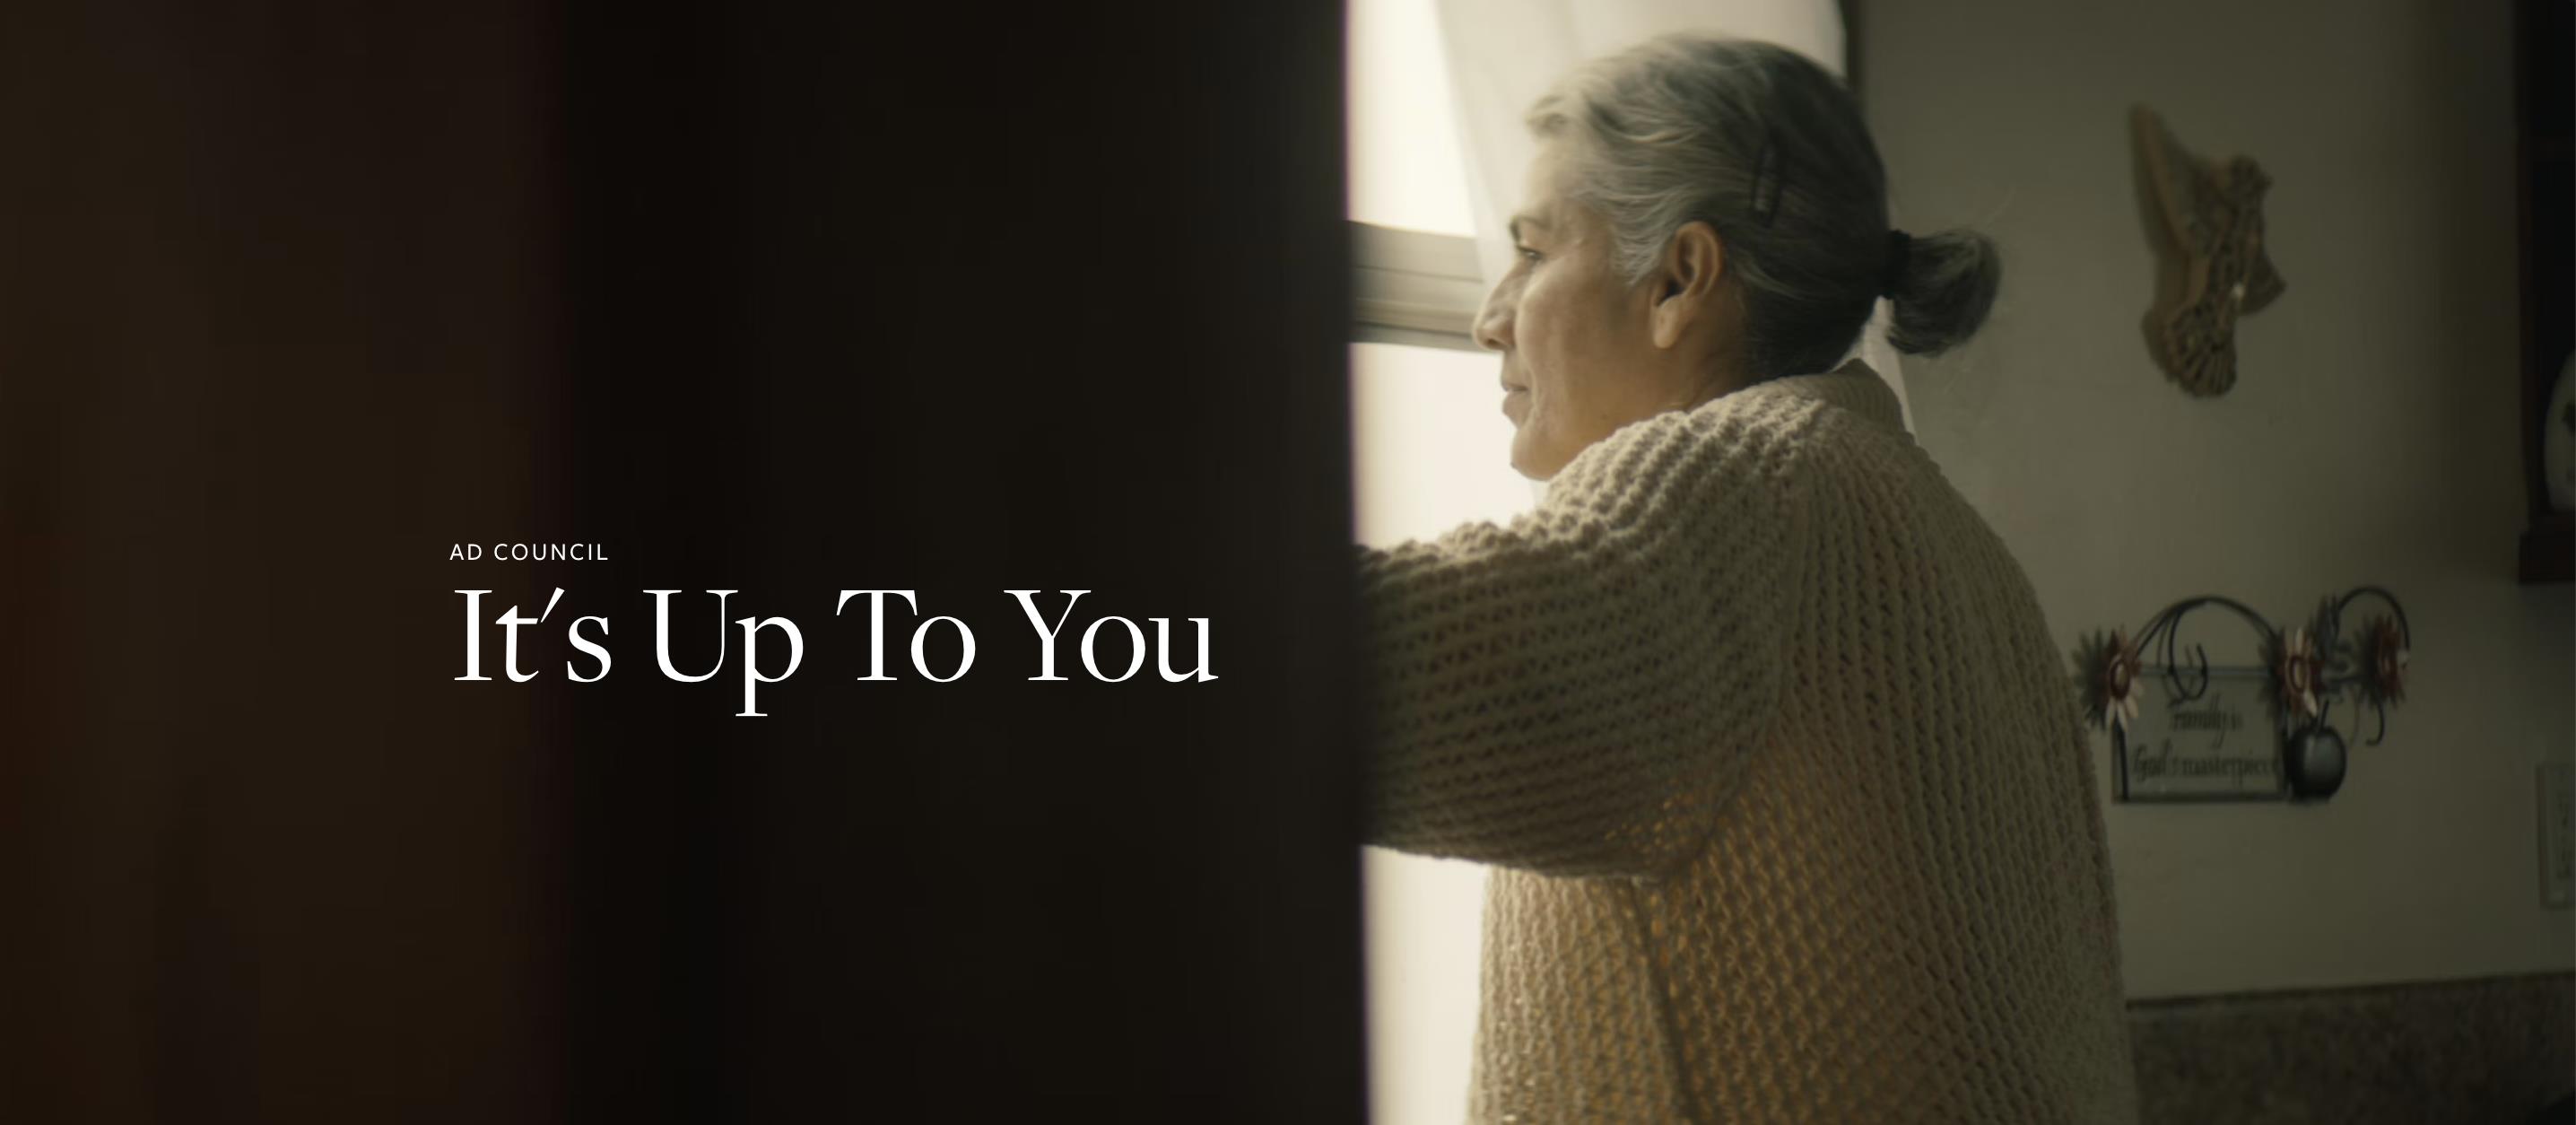 AdCouncil: It's Up to You